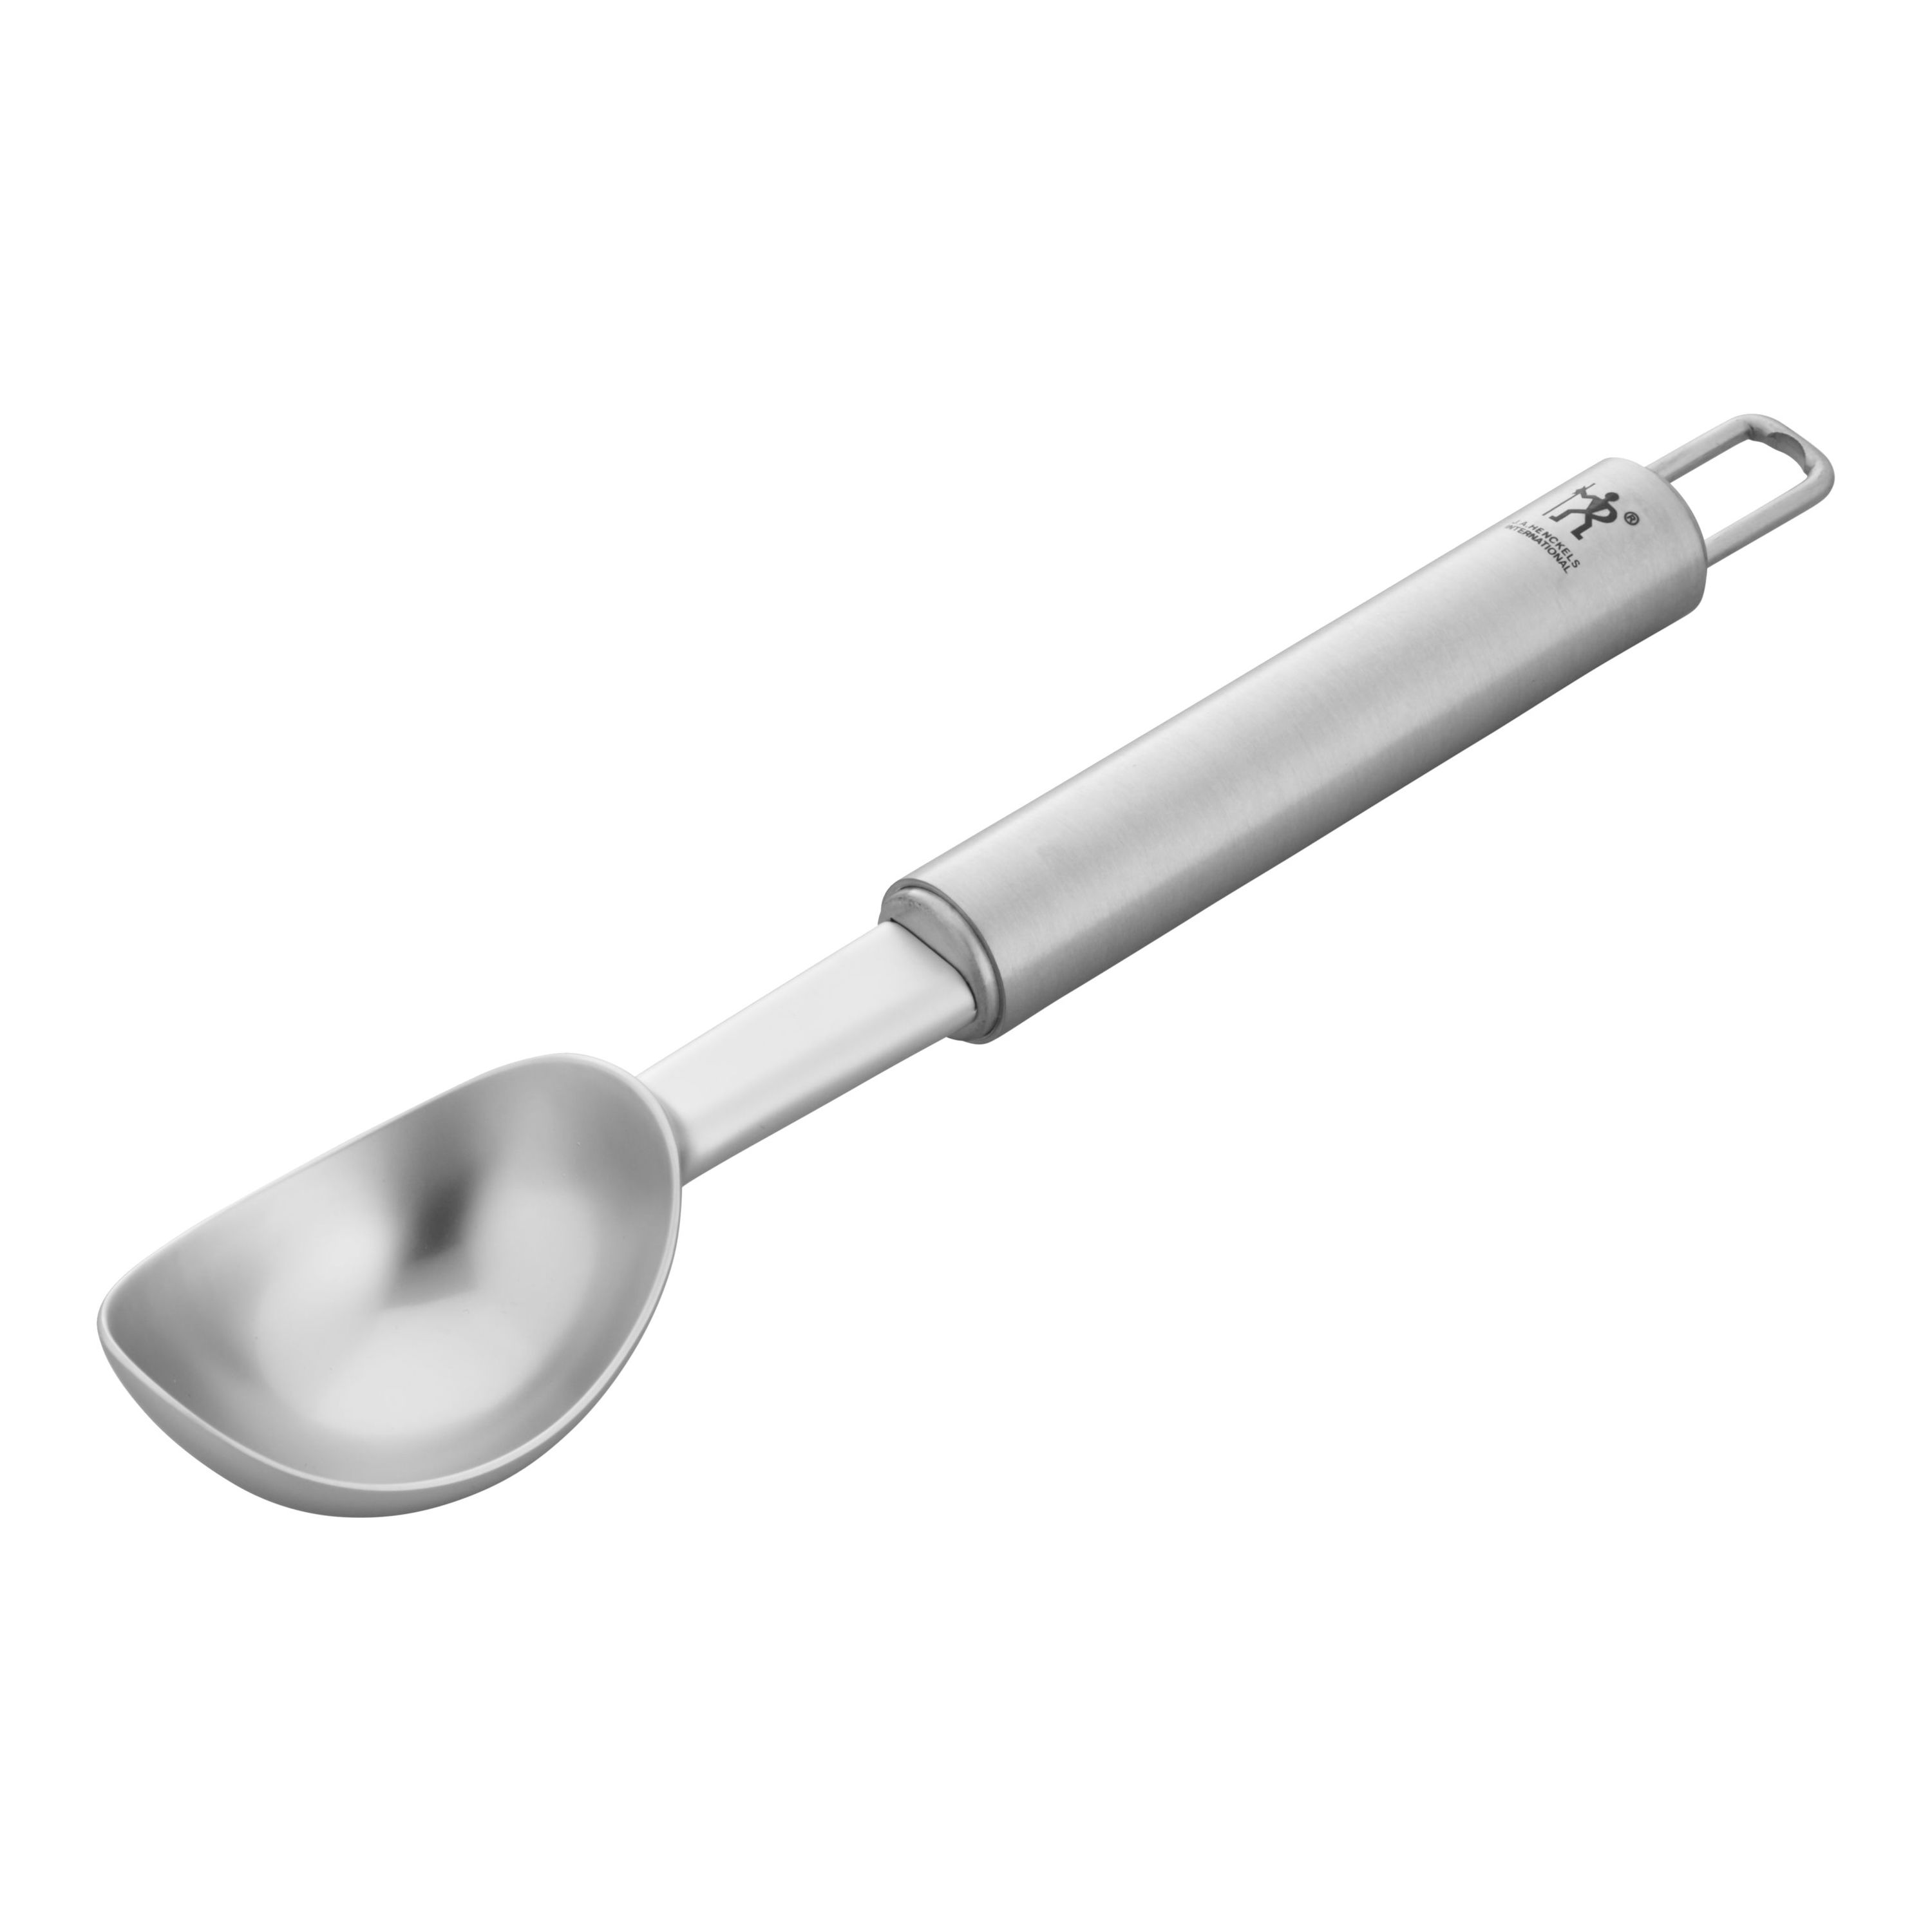 Social Chef Stainless Steel Cookie Scoop - Small Cookie Dough Scooper for  Perfec